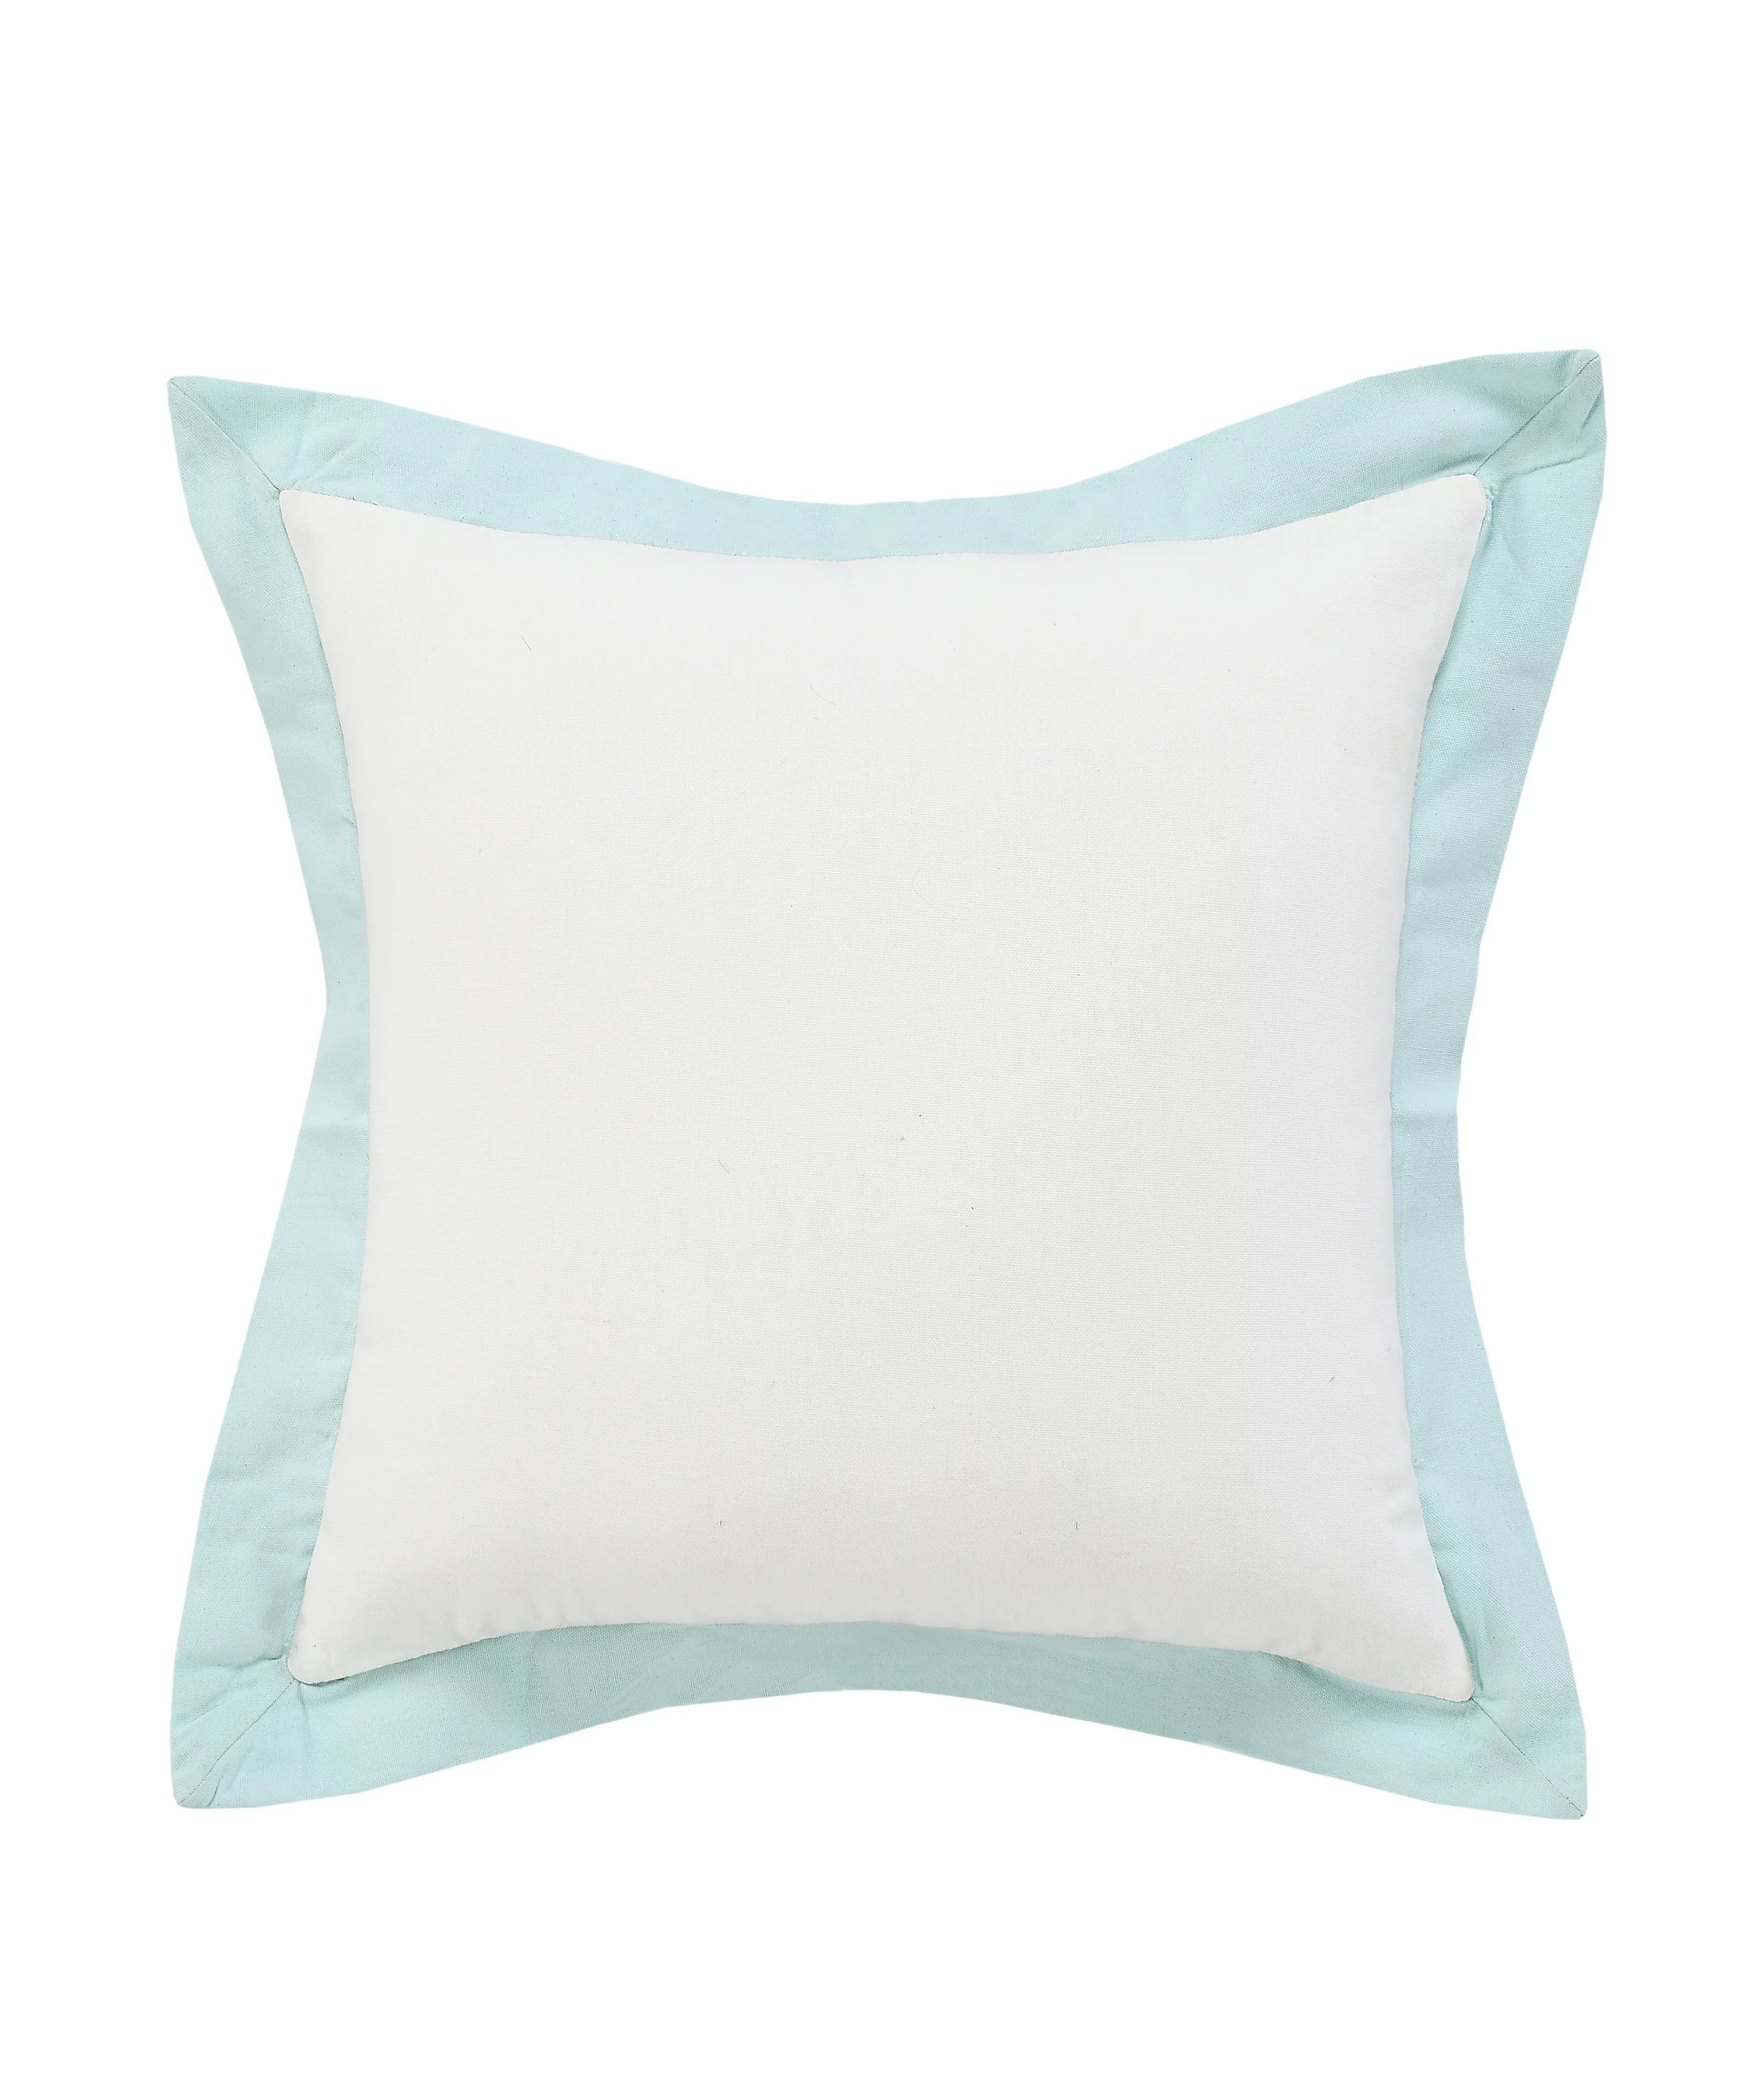 Ox BayOx Bay Border Flange Frame Throw Pillow, White / Icy Blue, 20" Square, Count per Pack 1USD$... | Walmart (US)